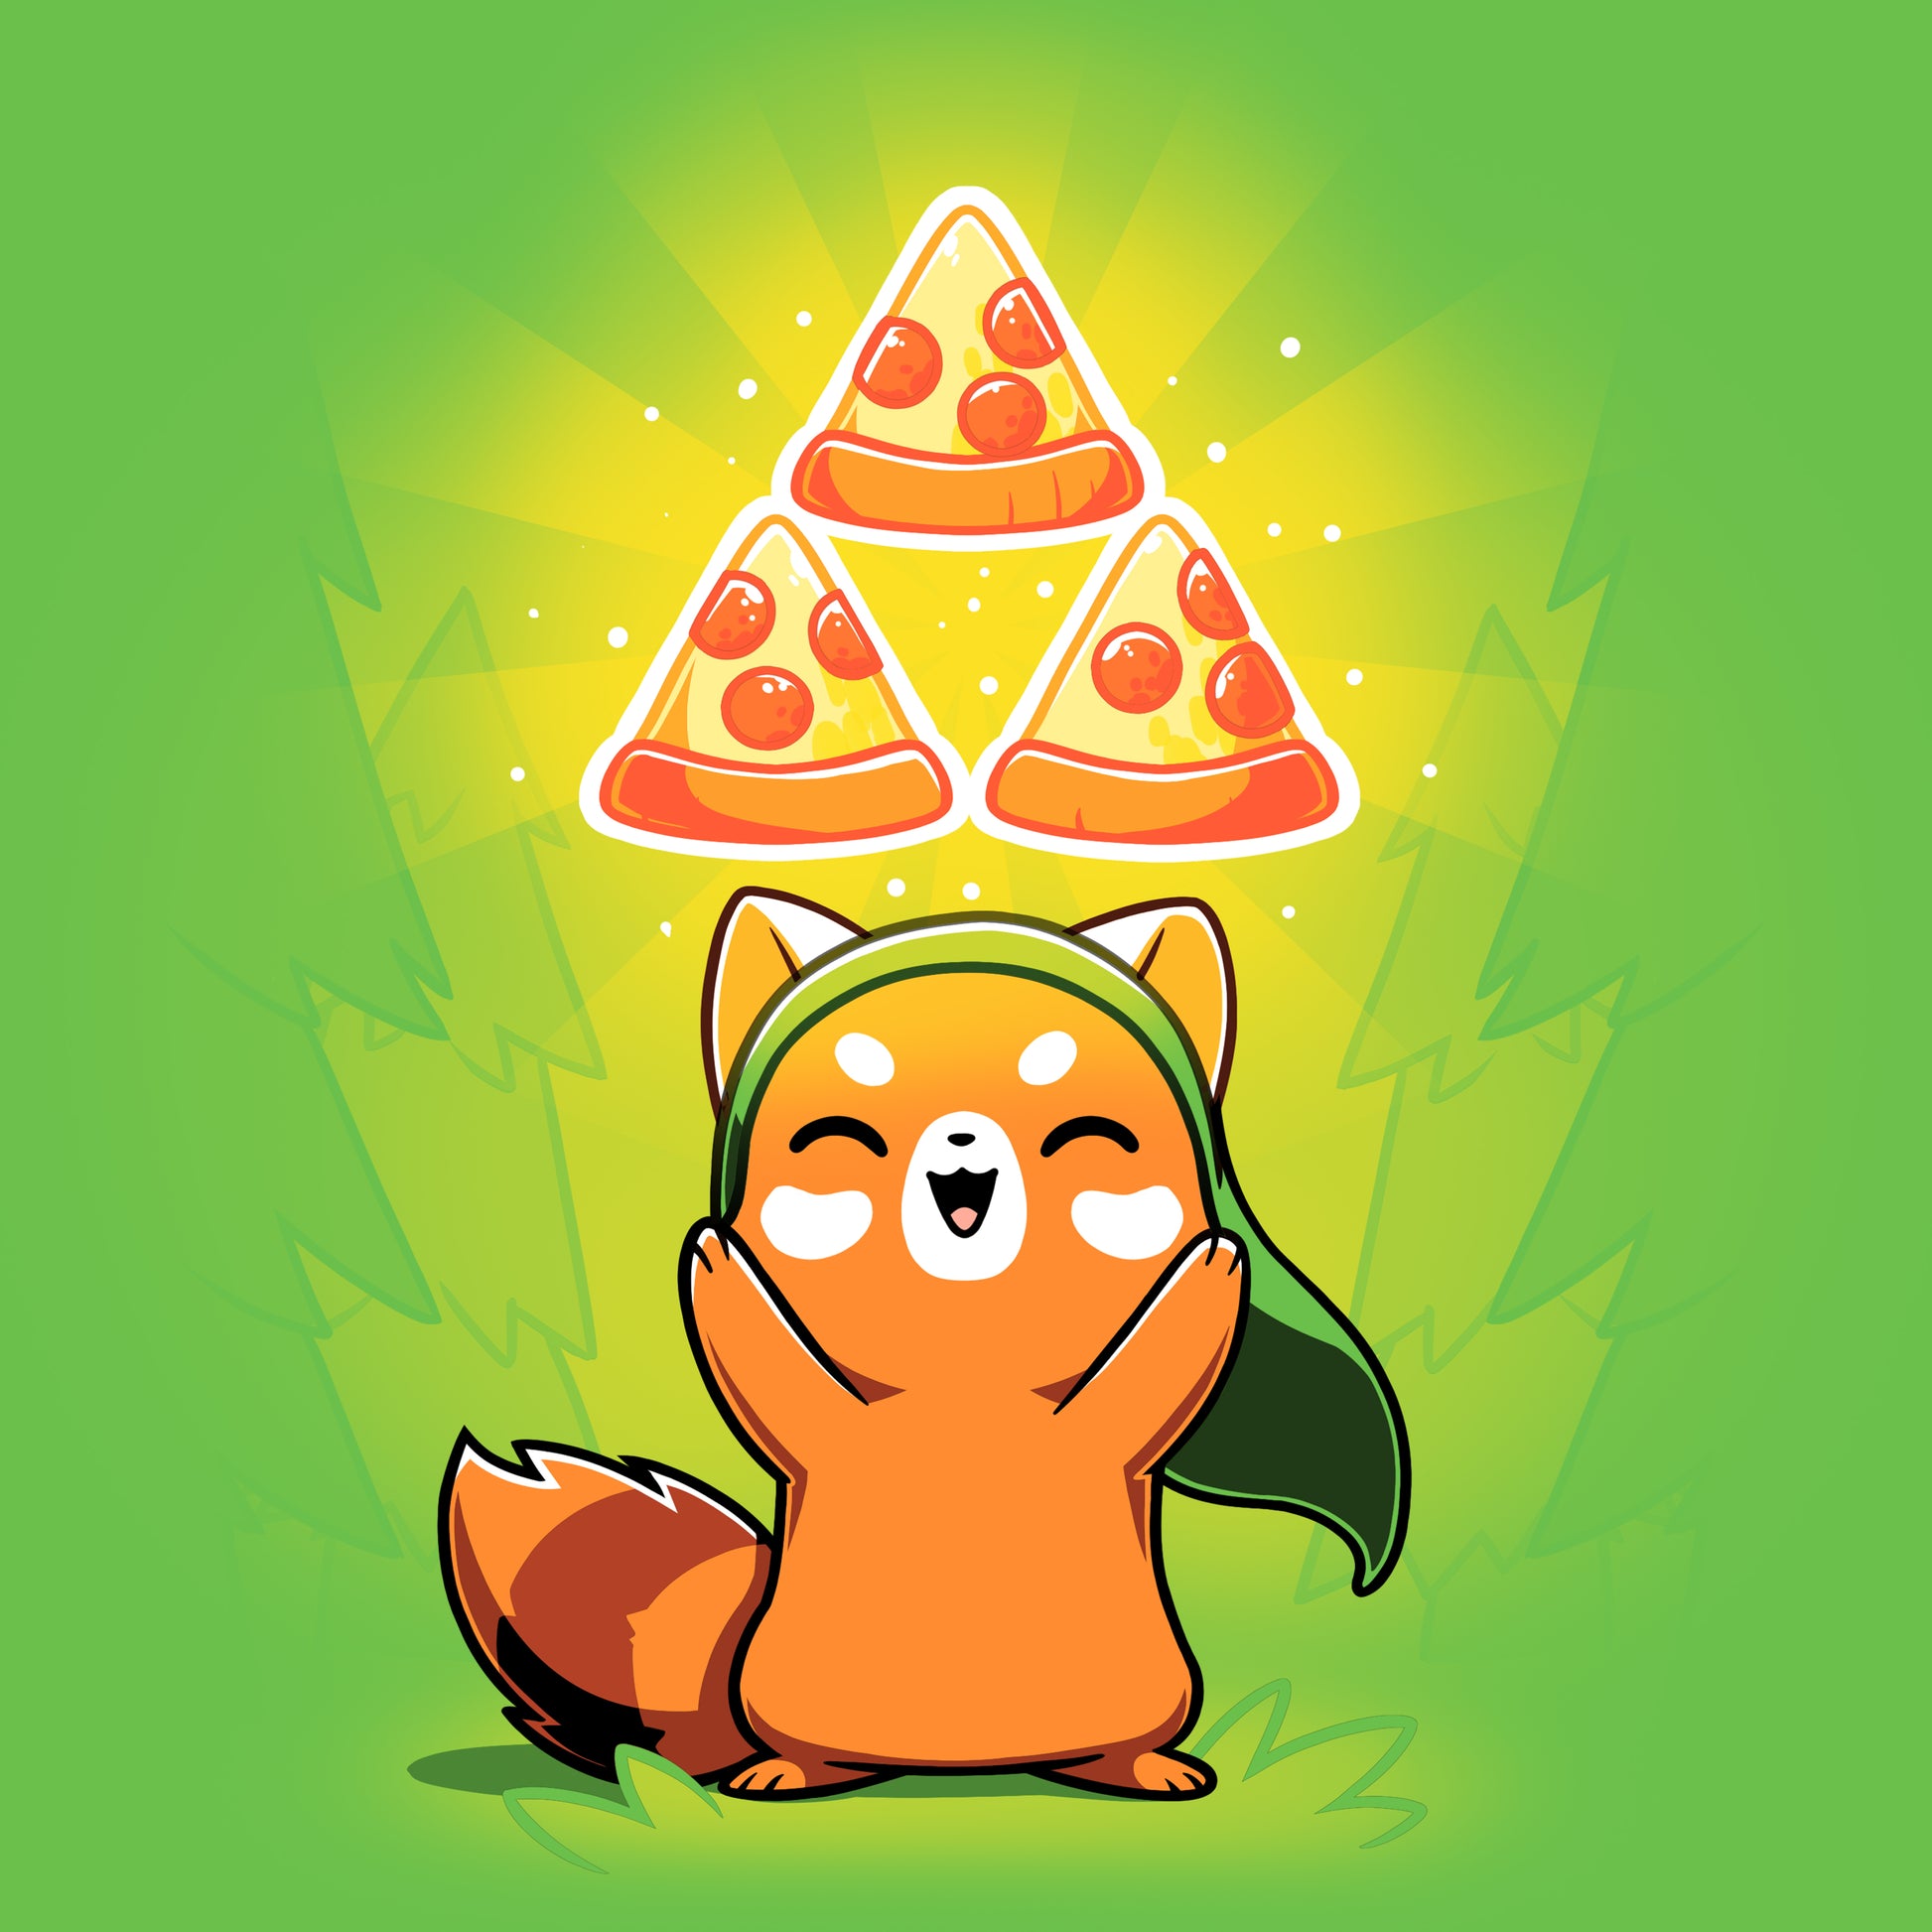 A raccoon with The Power of Pizza on his head, brought to you by TeeTurtle.